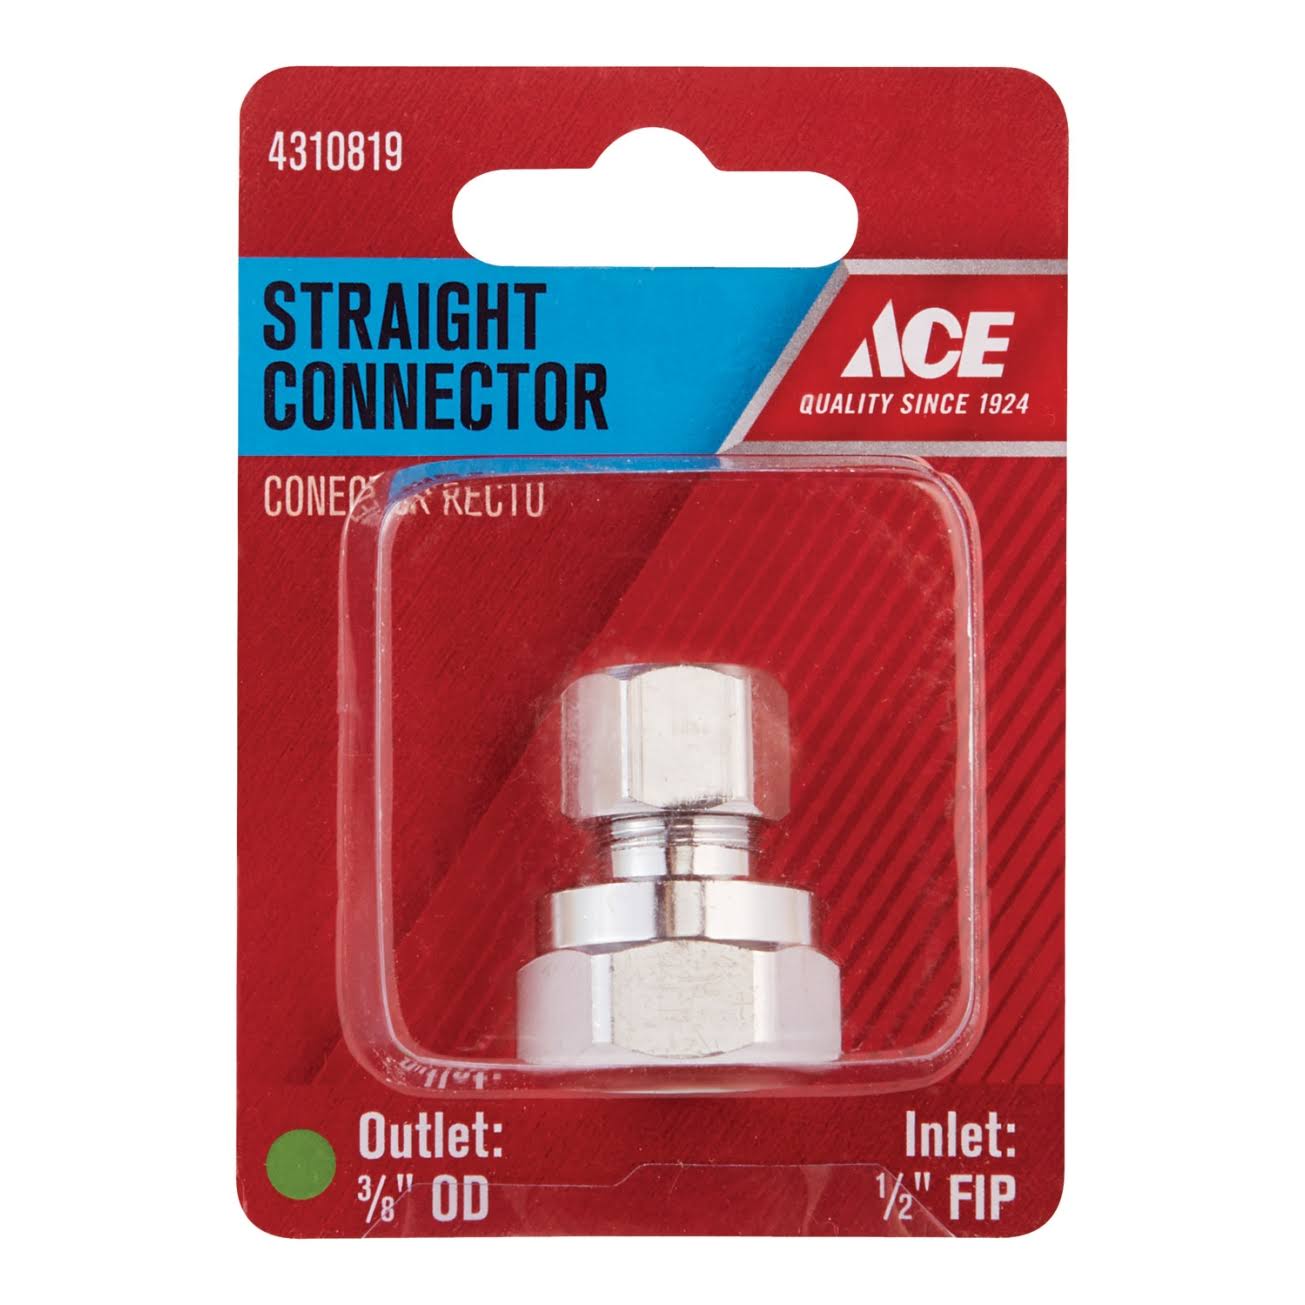 Ace Straight Connector - 1/2" x 3/8"